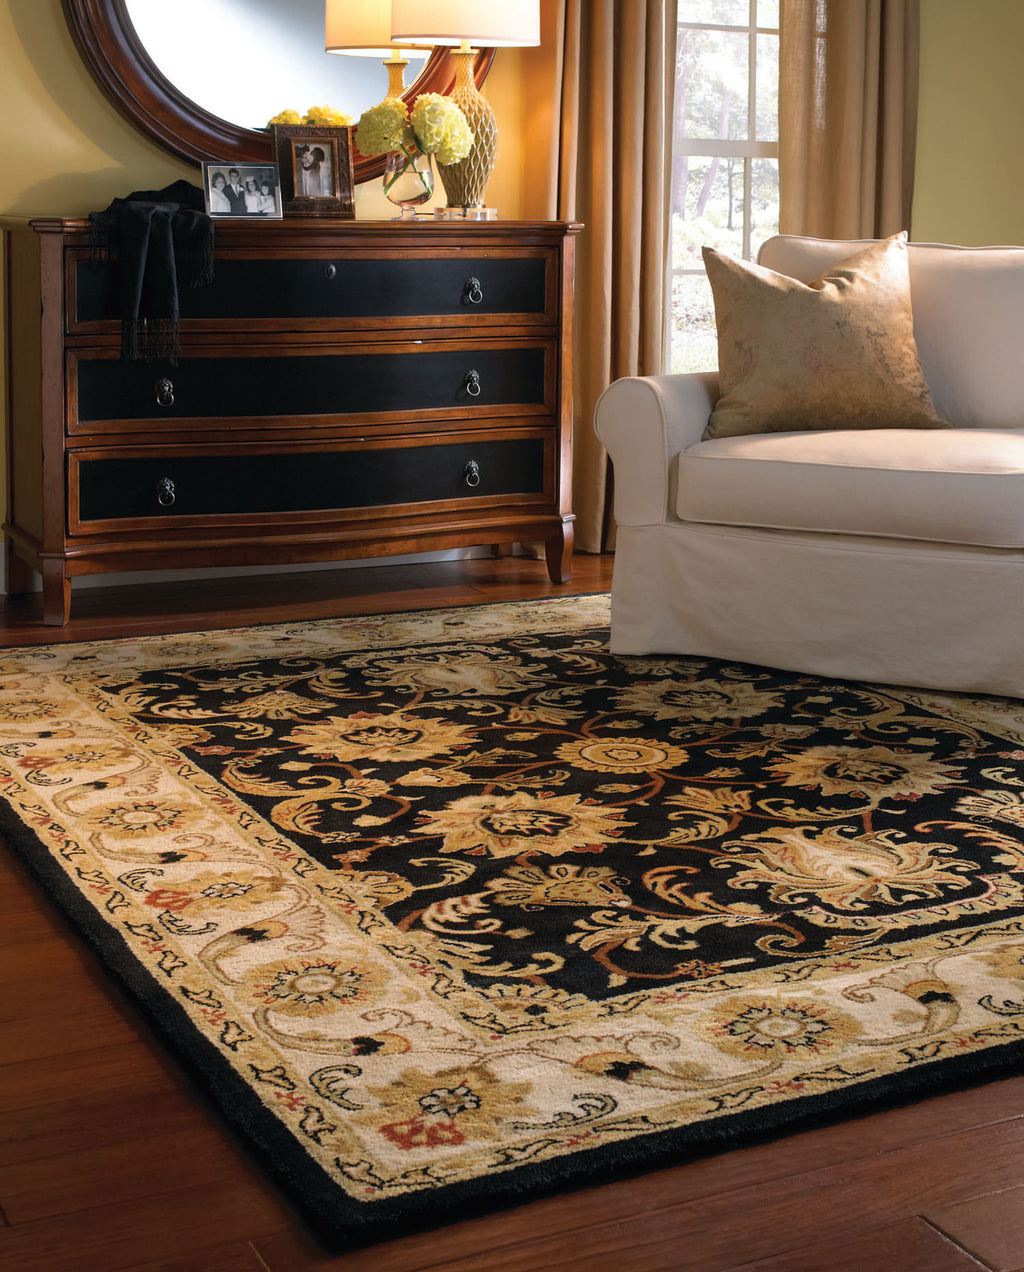 Capel Guilded 9205 Onyx 360 Area Rug Alternate View Feature